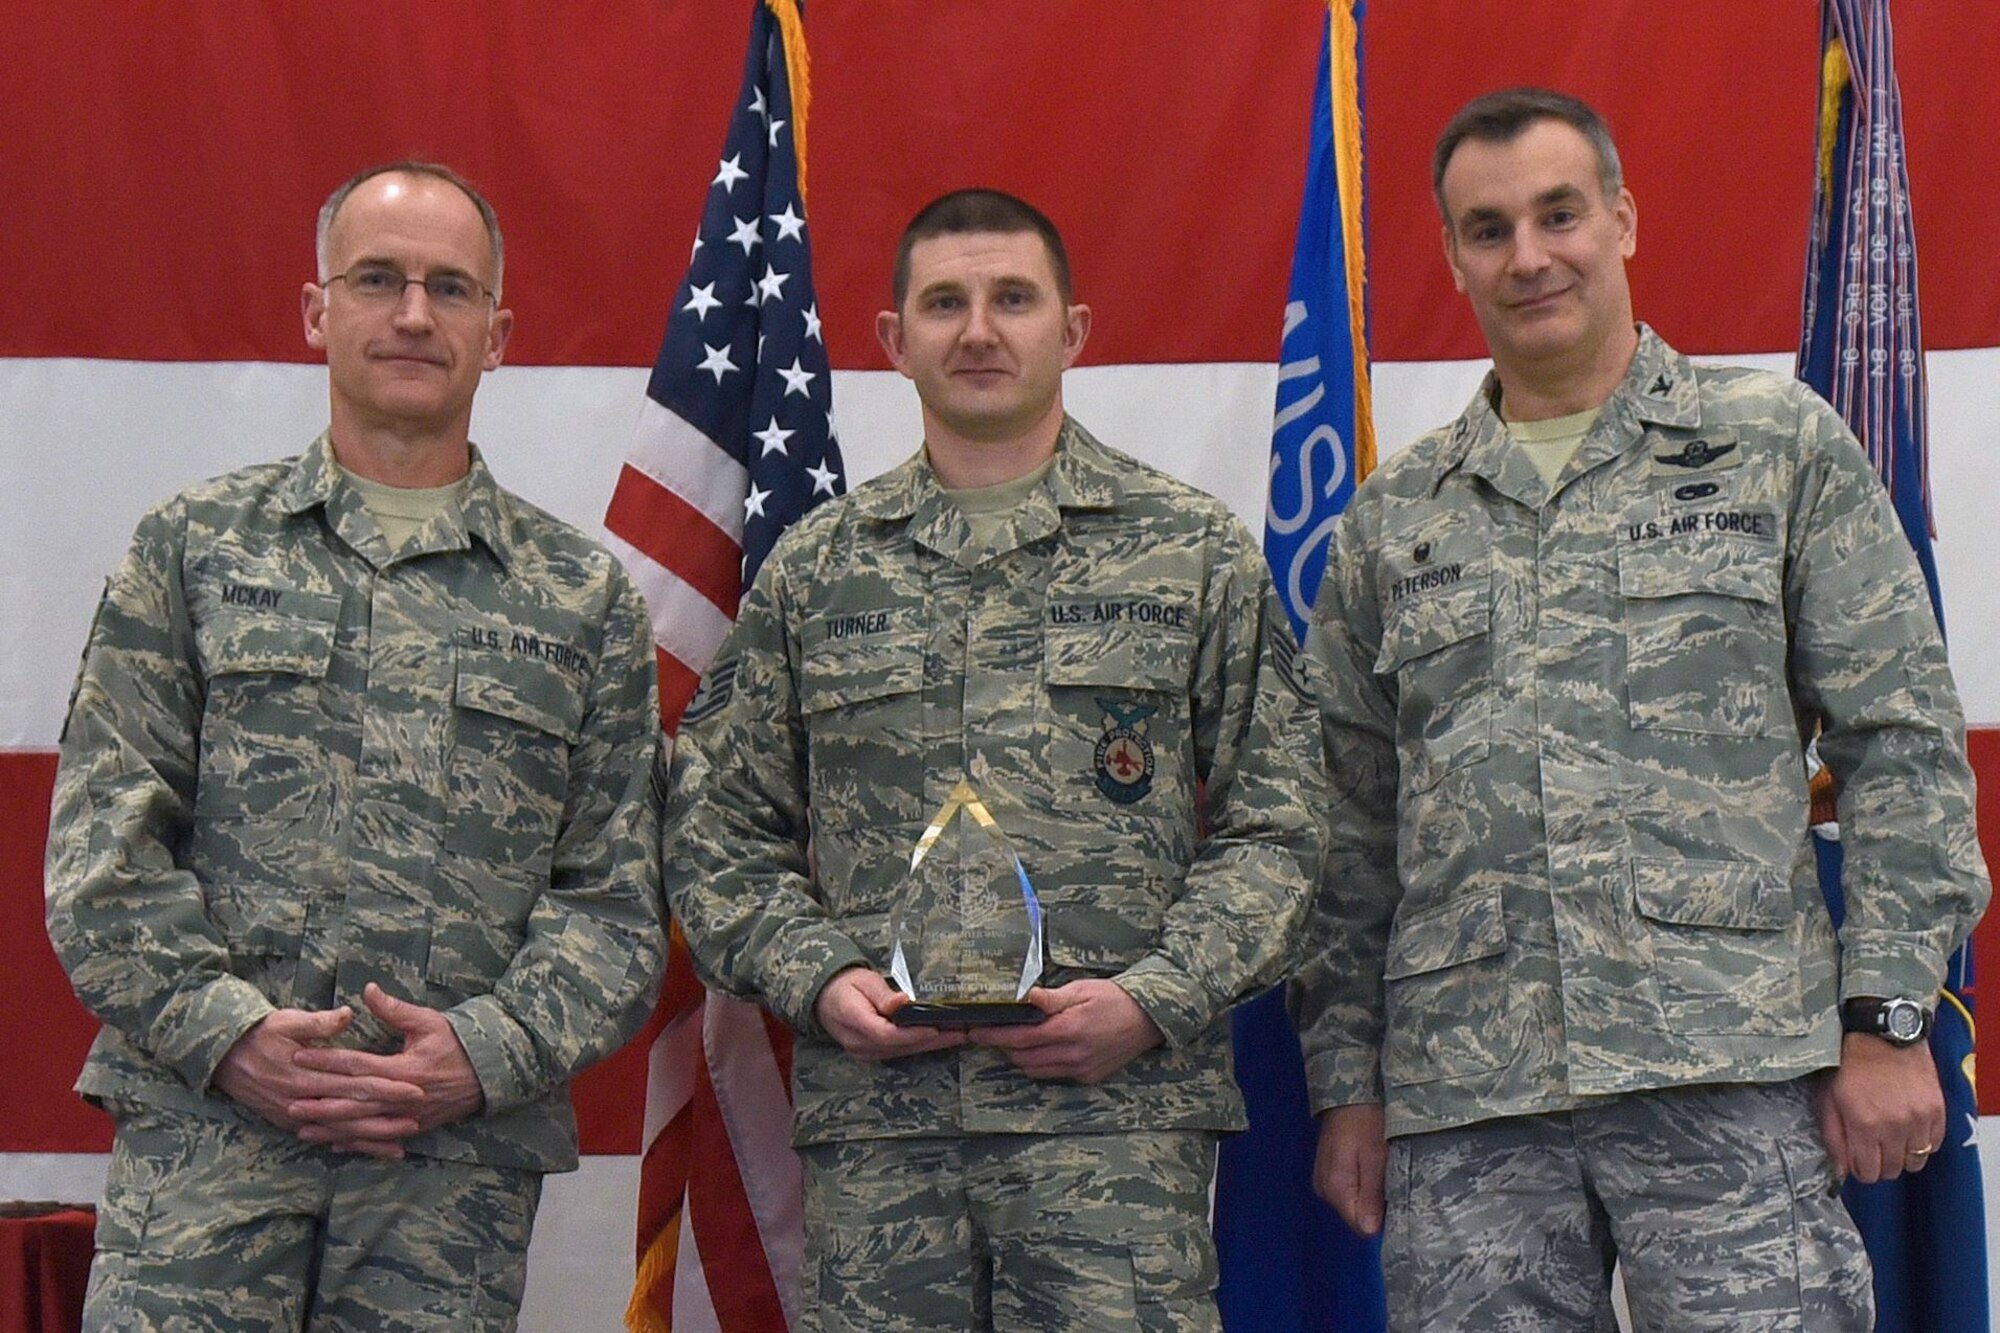 Command Chief Master Sgt. James McKay (left) joins 115th Fighter Wing Commander Col. Erik Peterson (right) to recognize fire protection journeyman Staff Sgt. Matthew Turner as noncommissioned officer of the year during the 115th FW annual awards ceremony at Truax Field in Madison, Wisconsin, Jan. 6, 2017. The ceremony highlighted Airman from throughout the unit who displayed exemplary skill and leadership in the performance of their duties both at home, and in deployed locations around the world. (U.S. Air National Guard photo by Tech. Sgt. Andrea Rhode)